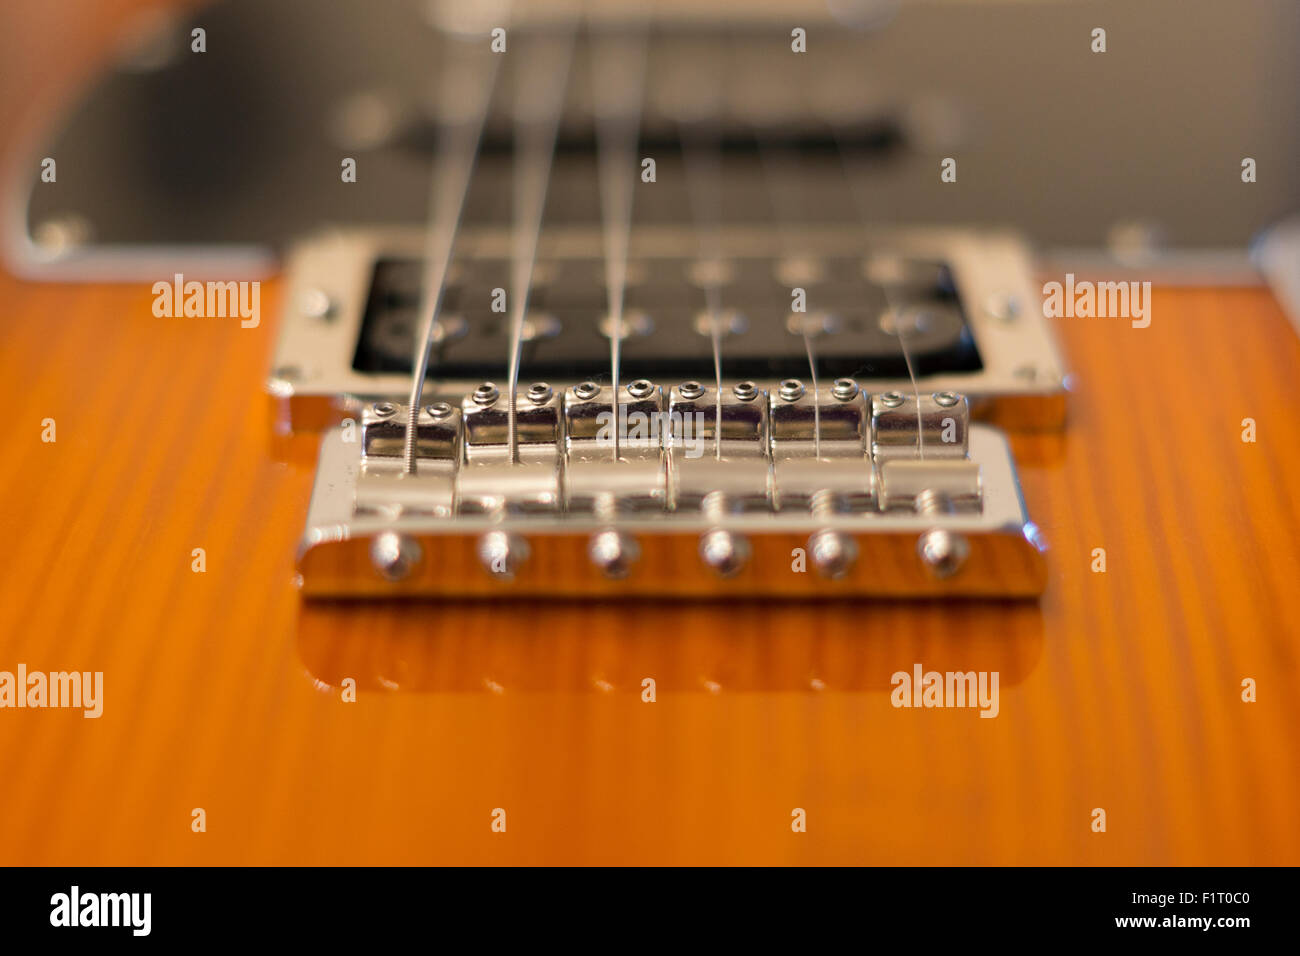 A view on the bridge and saddles of a Fender guitar, Modern Player Telecaster Plus Stock Photo